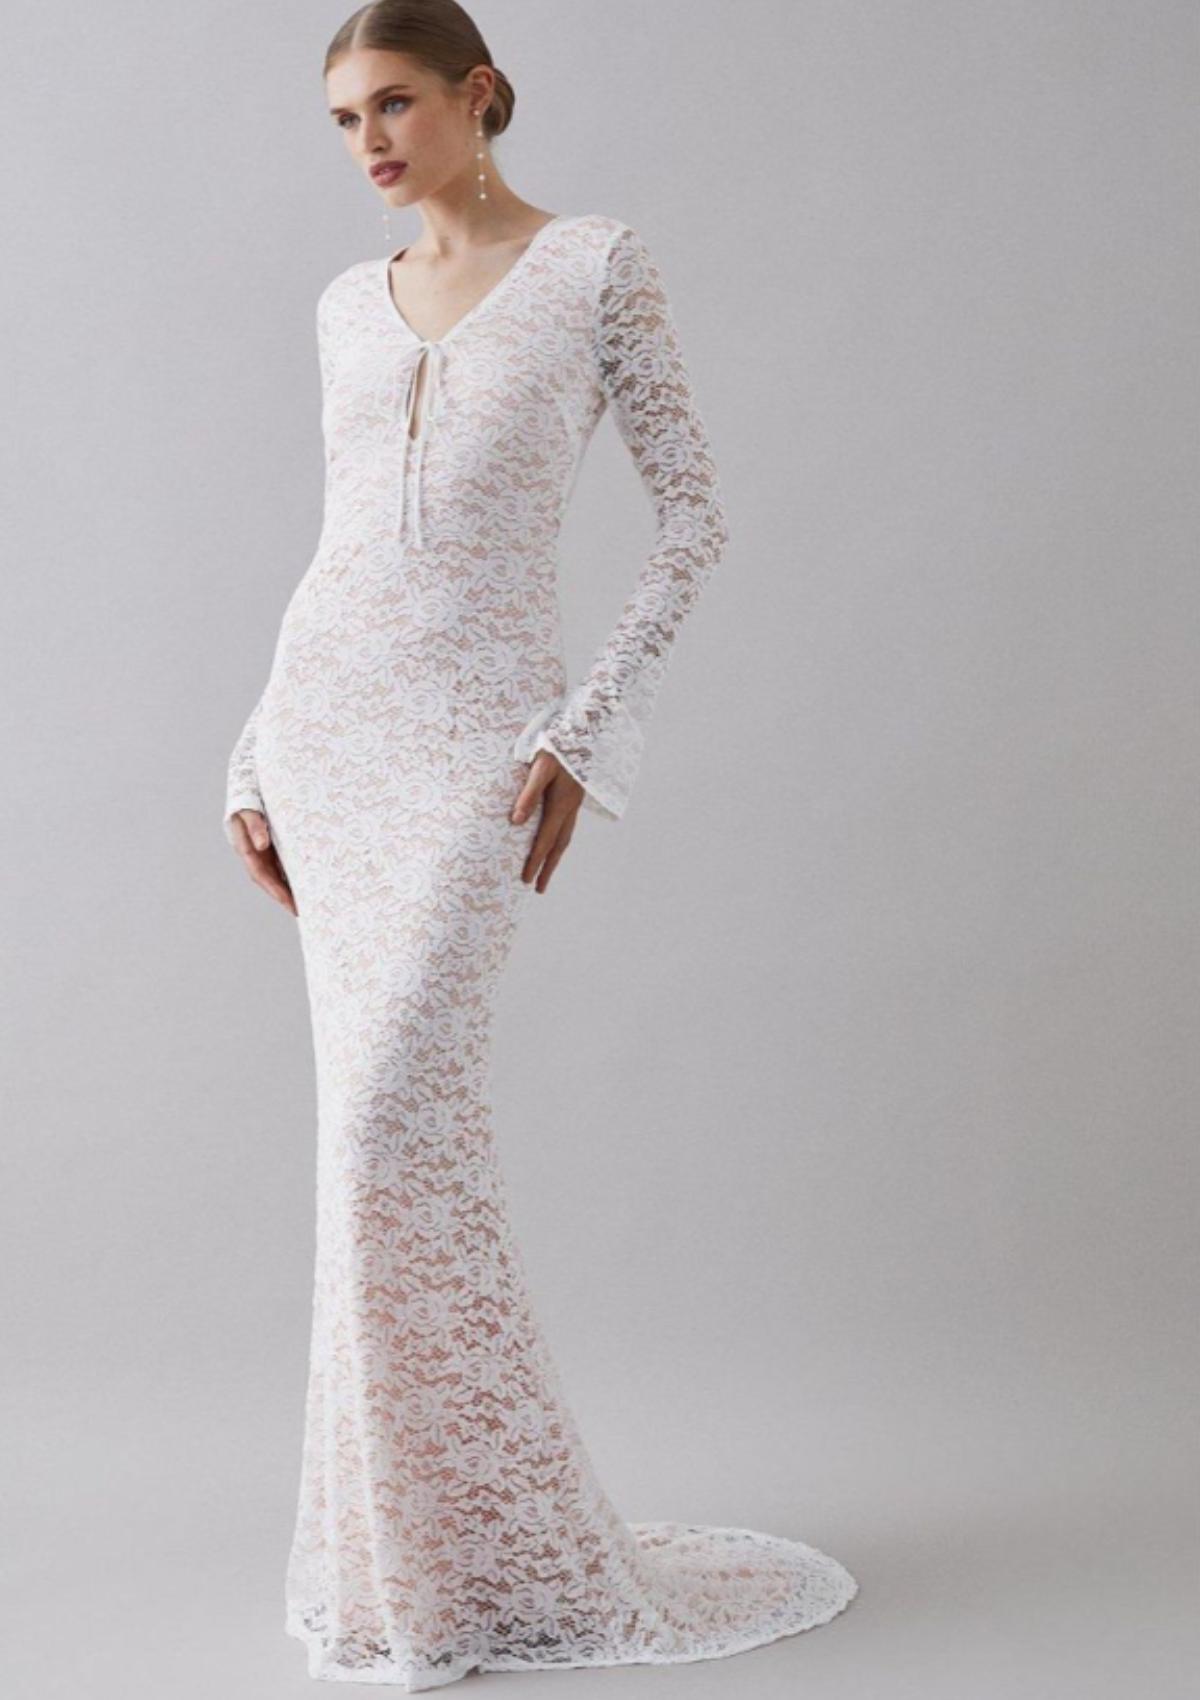 Lace Insert Mermaid Midi Dress White - Luxe Fluted Dresses and